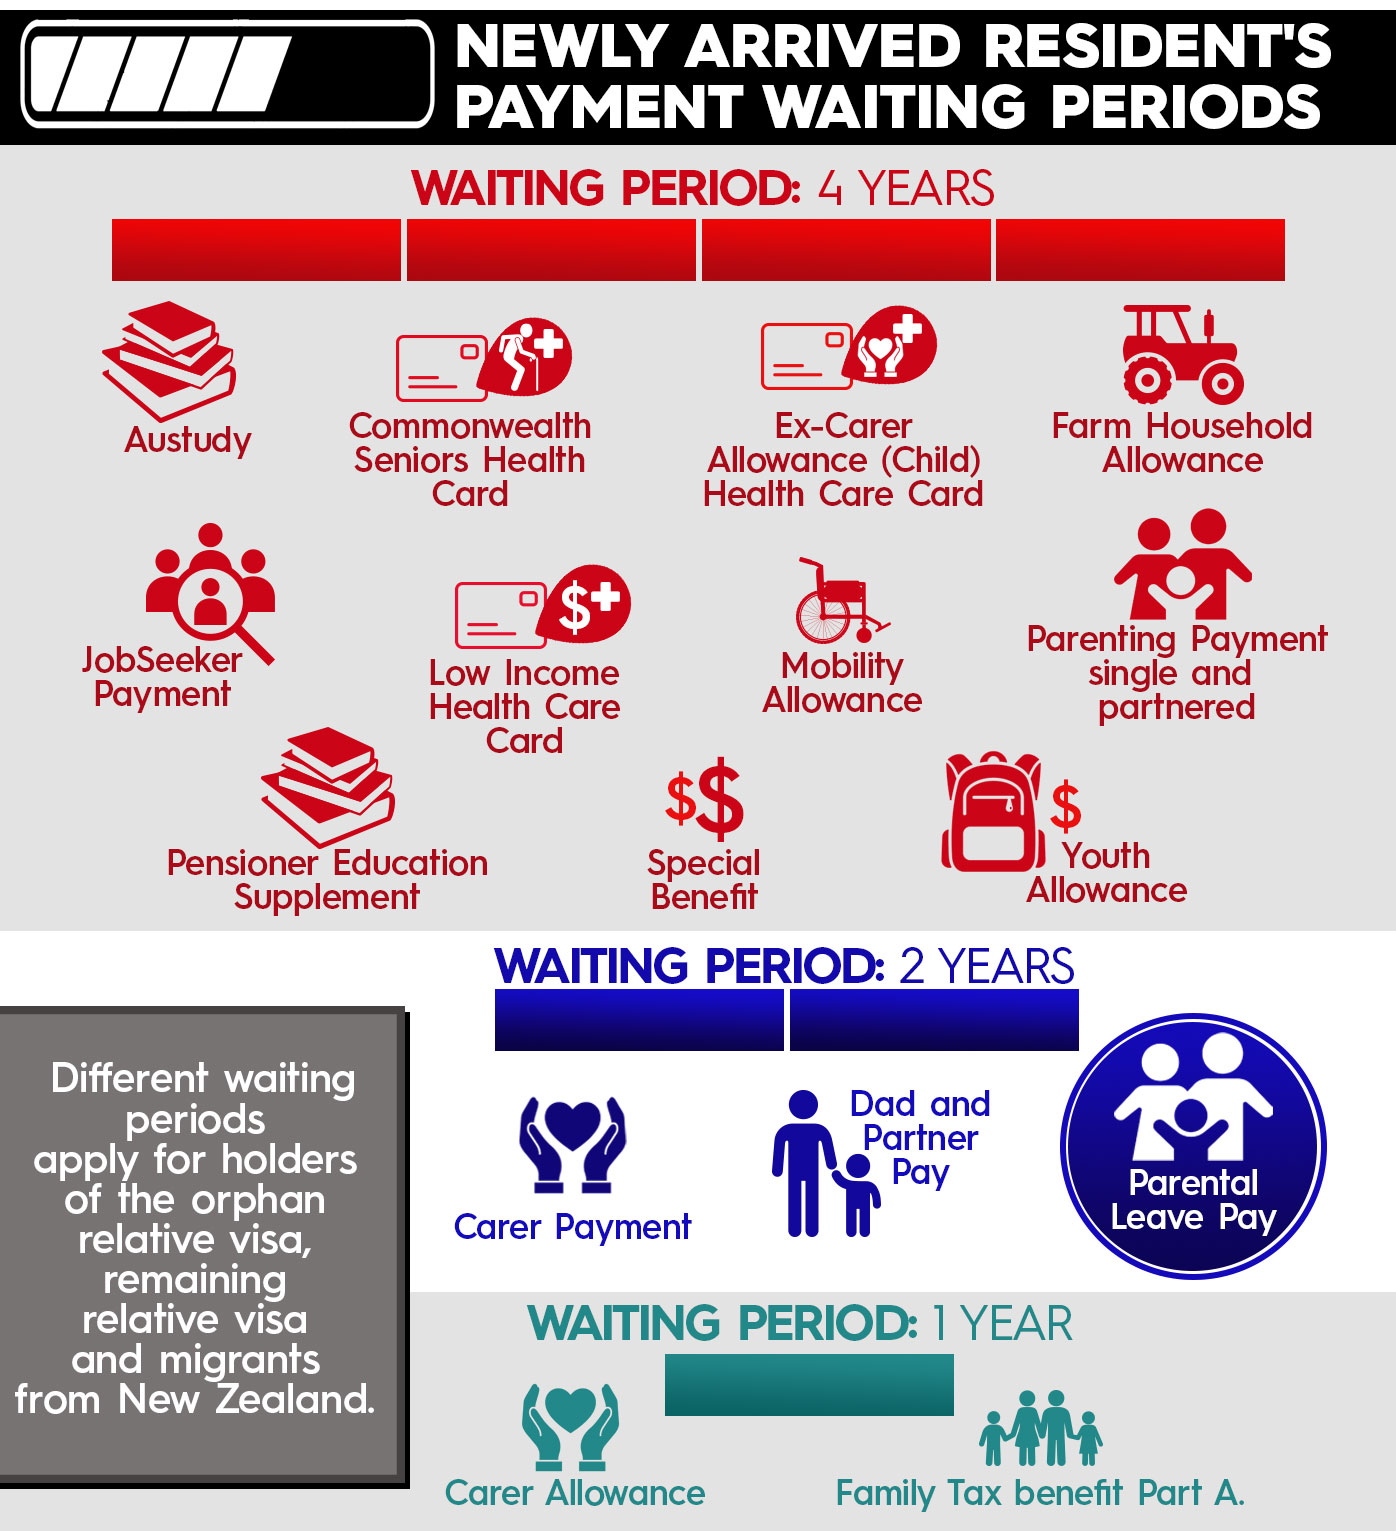 The current waiting periods for migrants to receive government benefits varies.